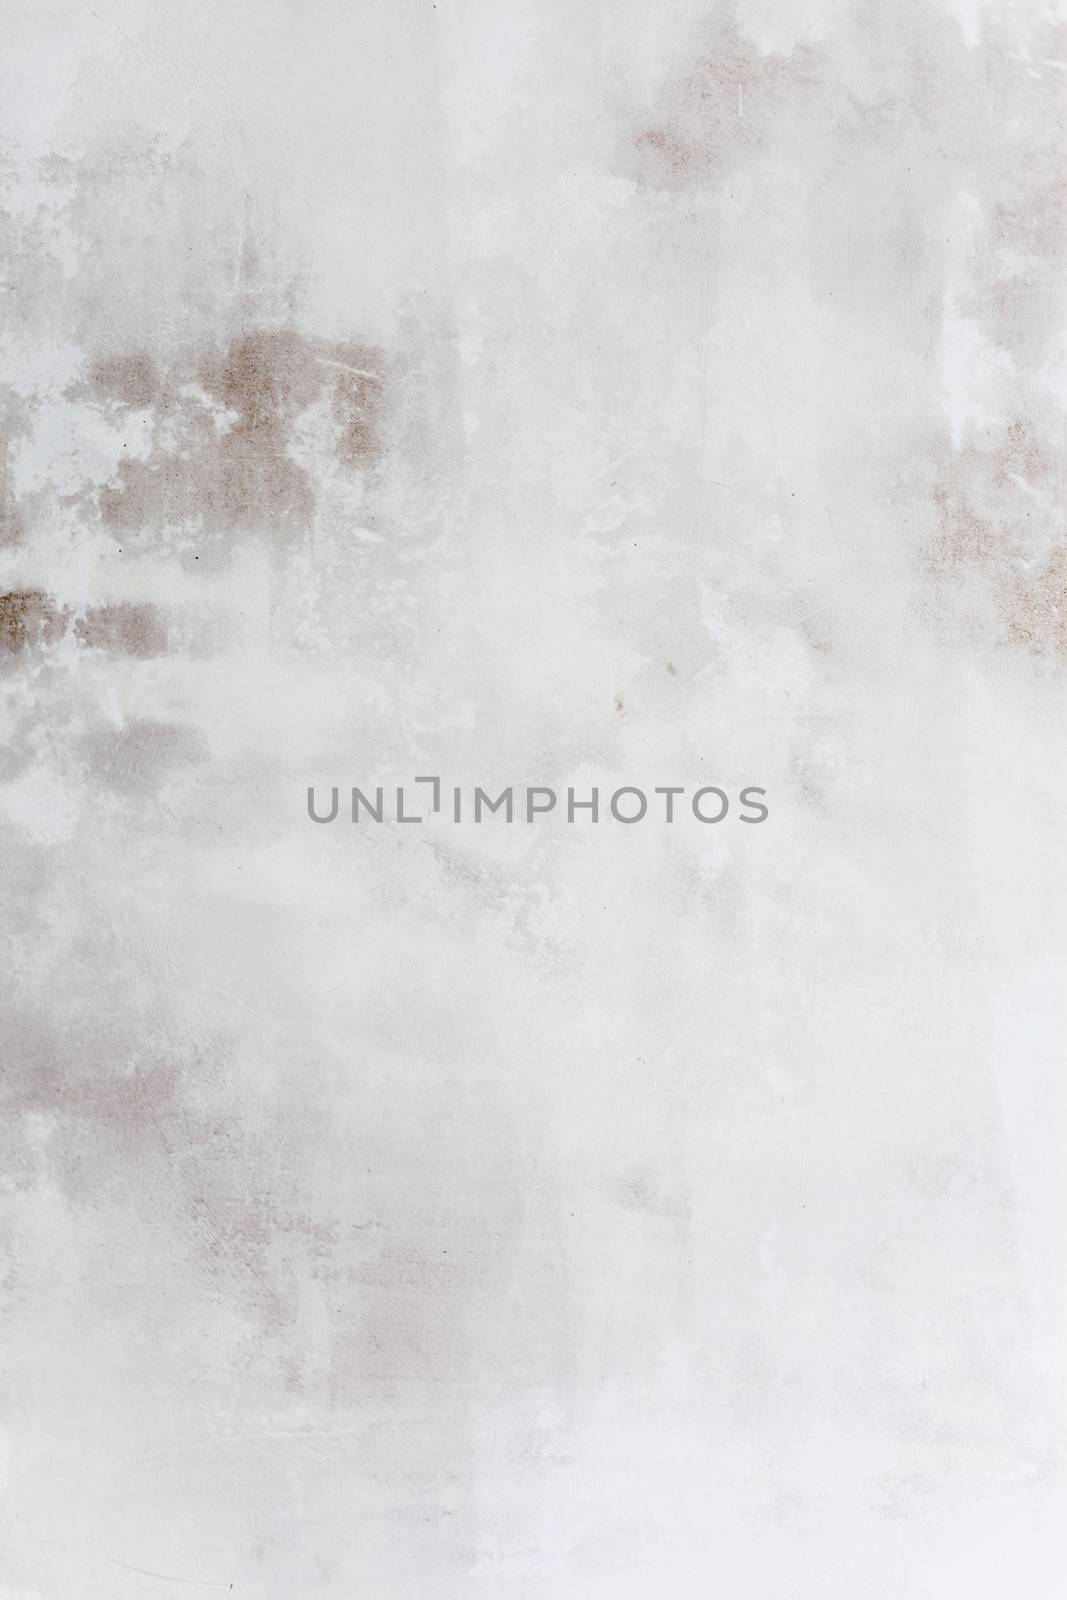 Grungy white concrete wall background by H2Oshka